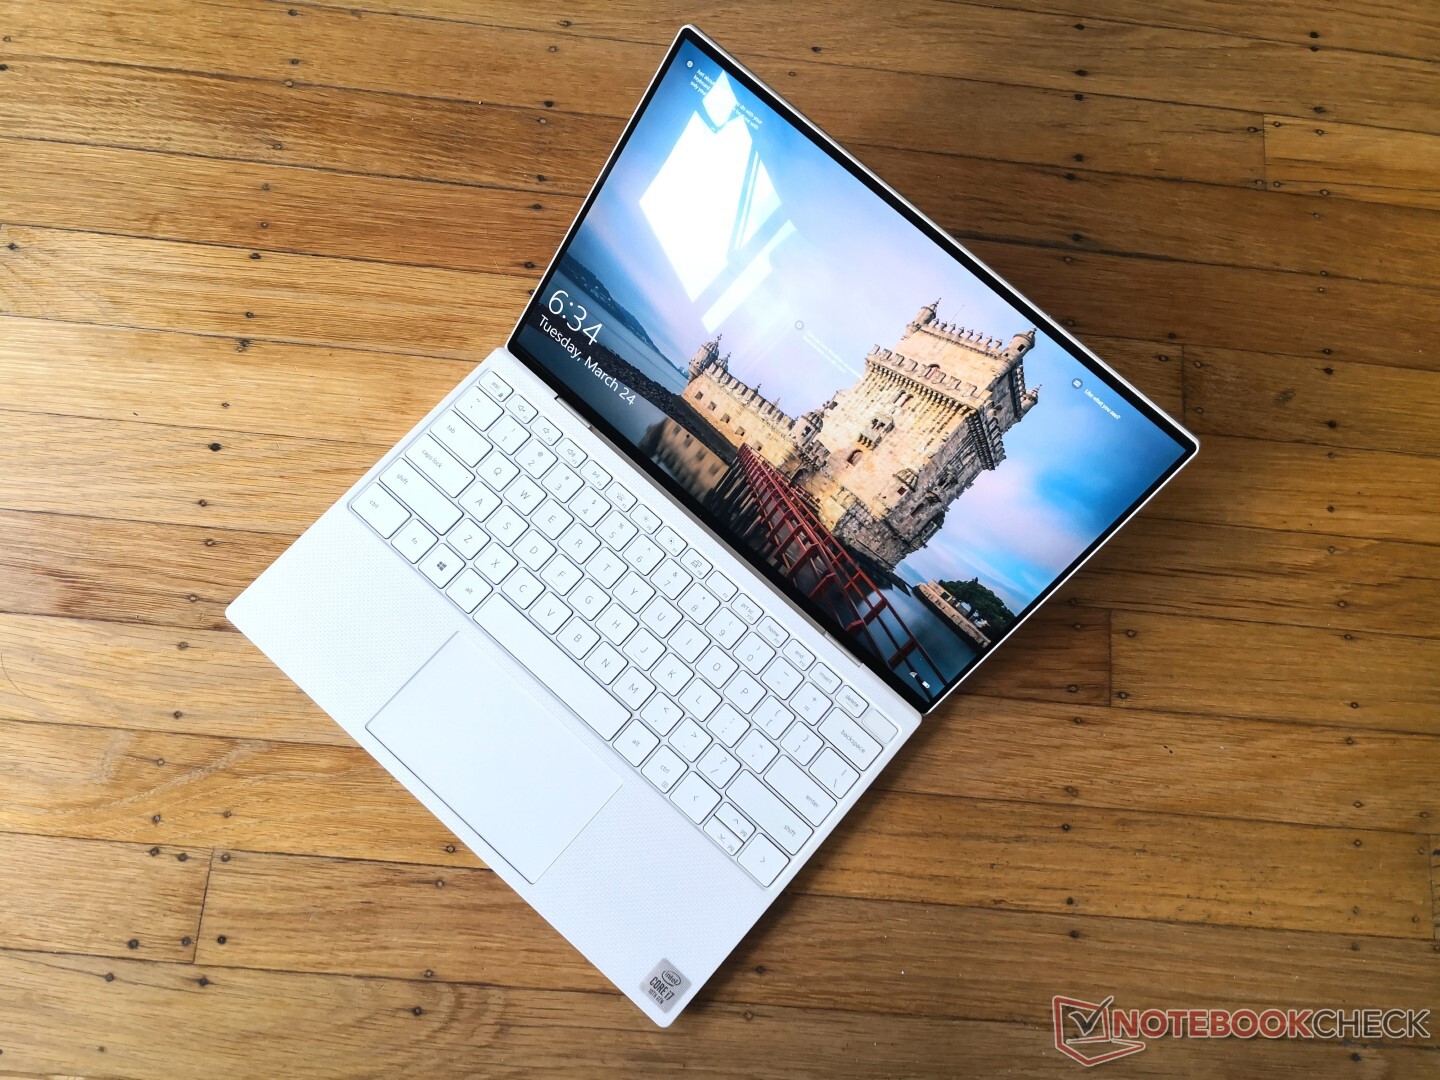 The XPS 13 9300 display can be 20 percent brighter than what Dell